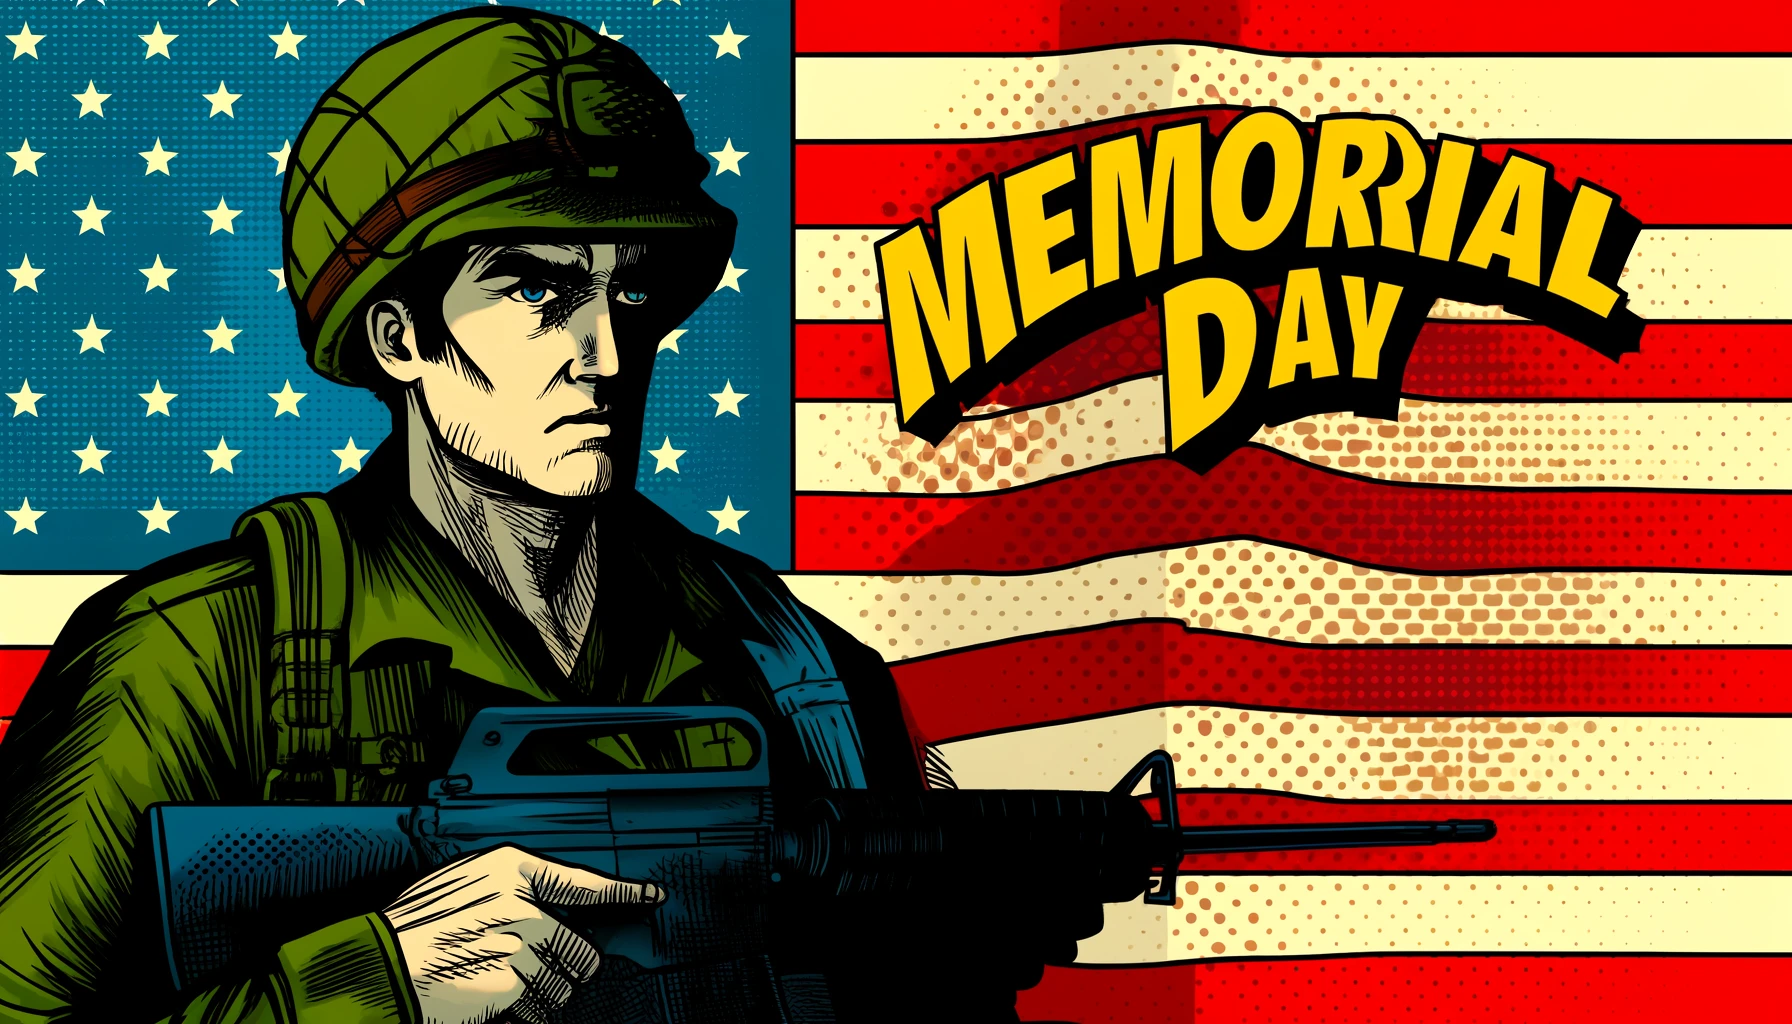 Deep Memorial Day Quotes for Remembrance